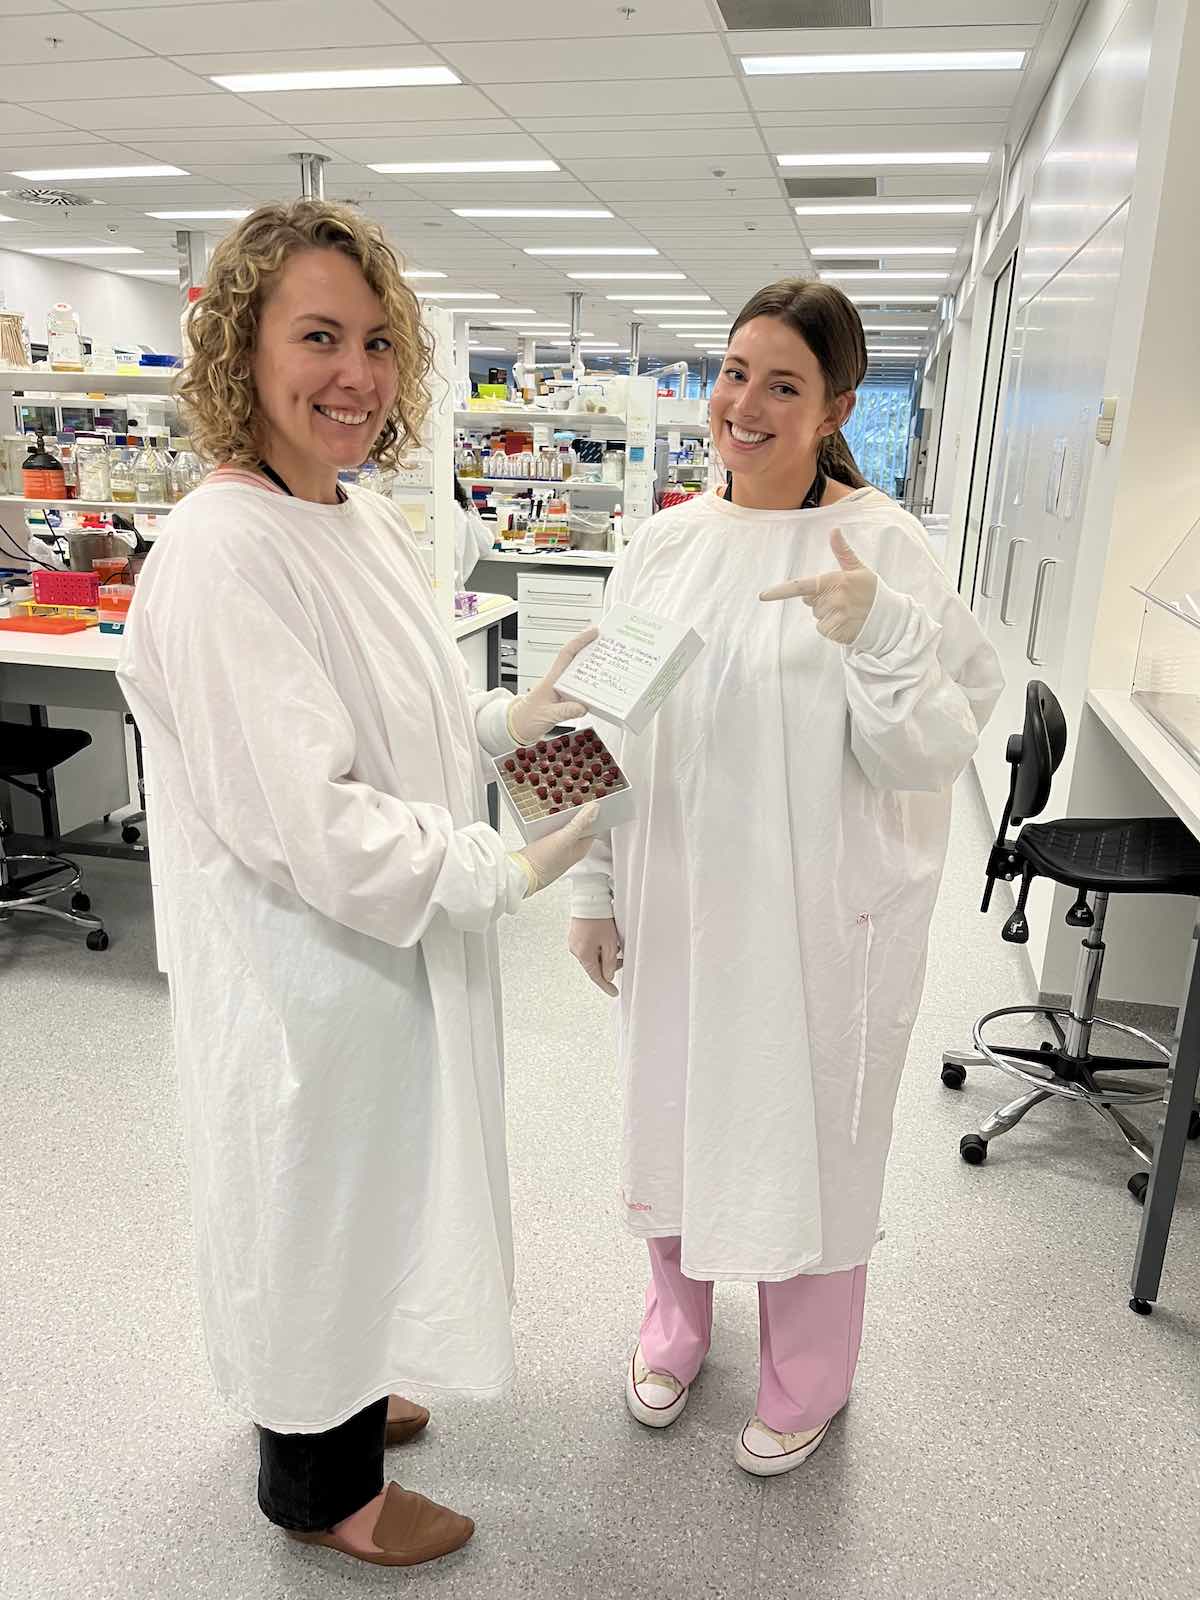 Jess and Steph in the lab!